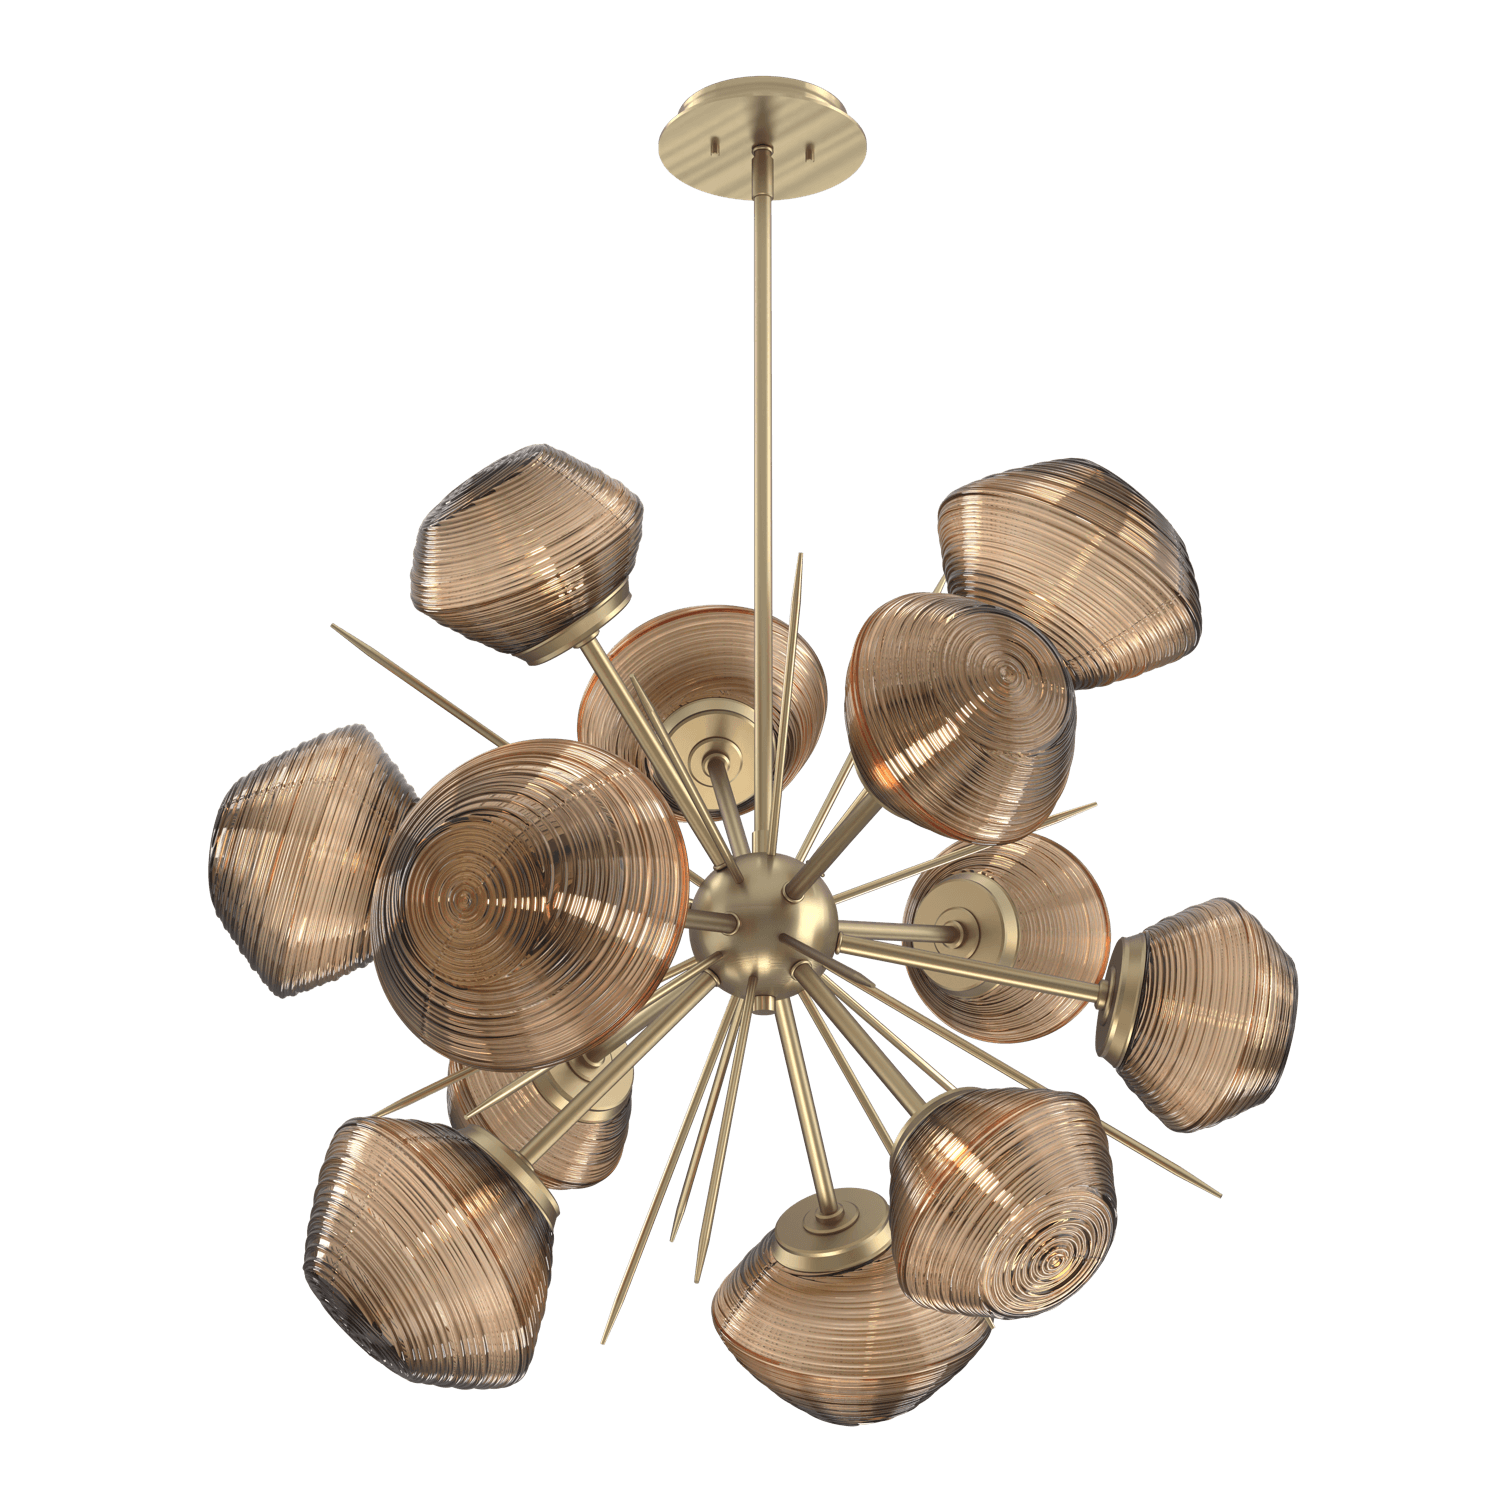 CHB0089-0G-HB-B-Hammerton-Studio-Mesa-36-inch-starburst-chandelier-with-heritage-brass-finish-and-bronze-blown-glass-shades-and-LED-lamping